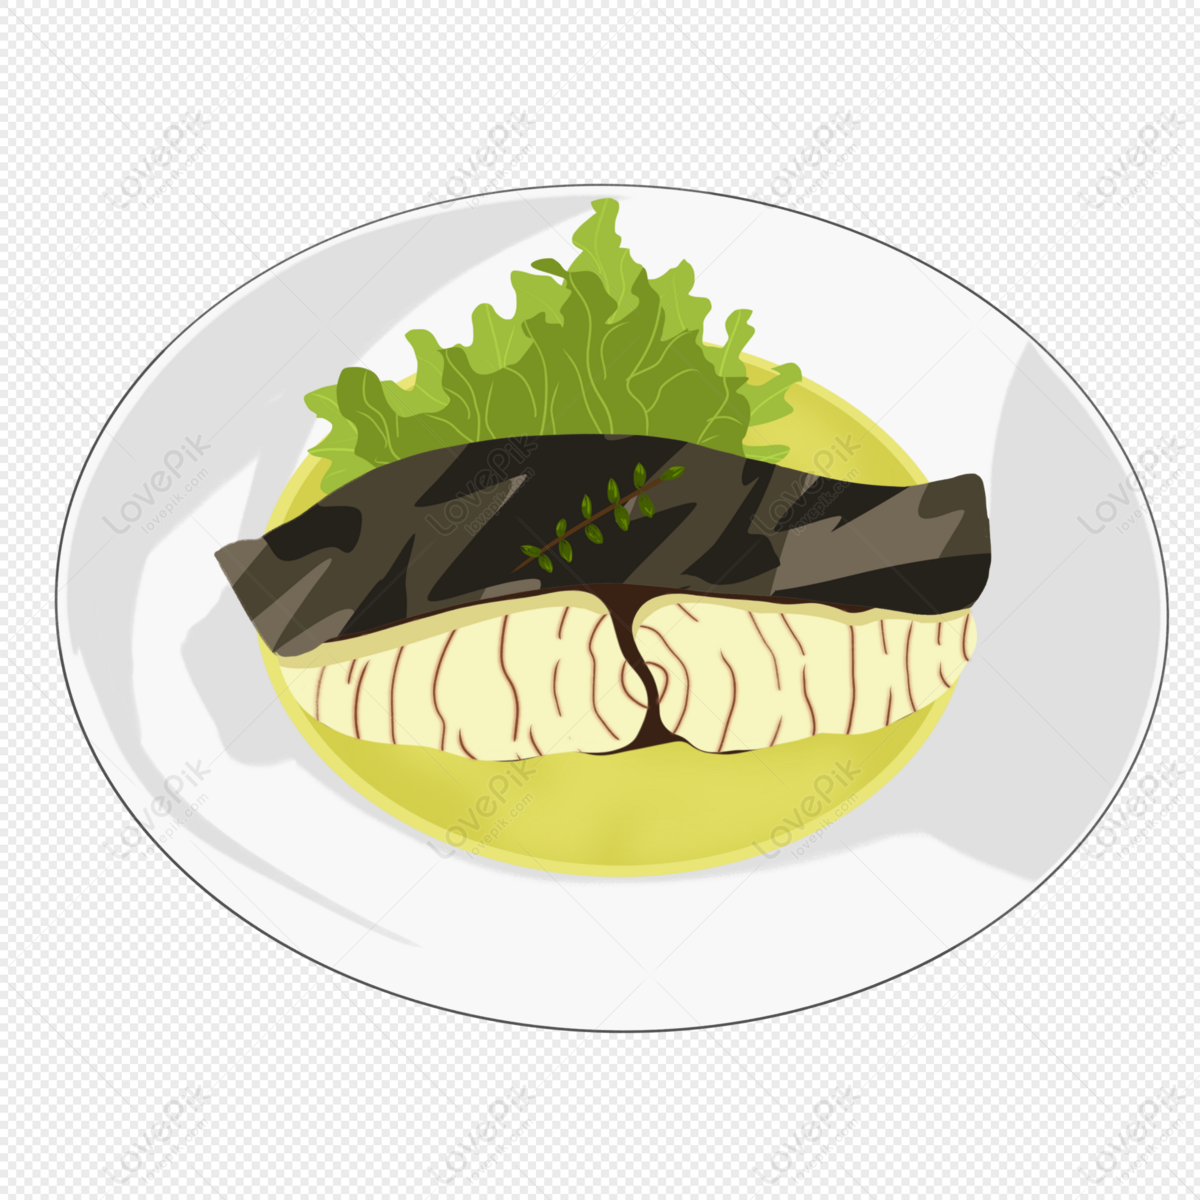 Hand Painted Gourmet Western Food Fish PNG Transparent Image And Clipart  Image For Free Download - Lovepik | 401204667